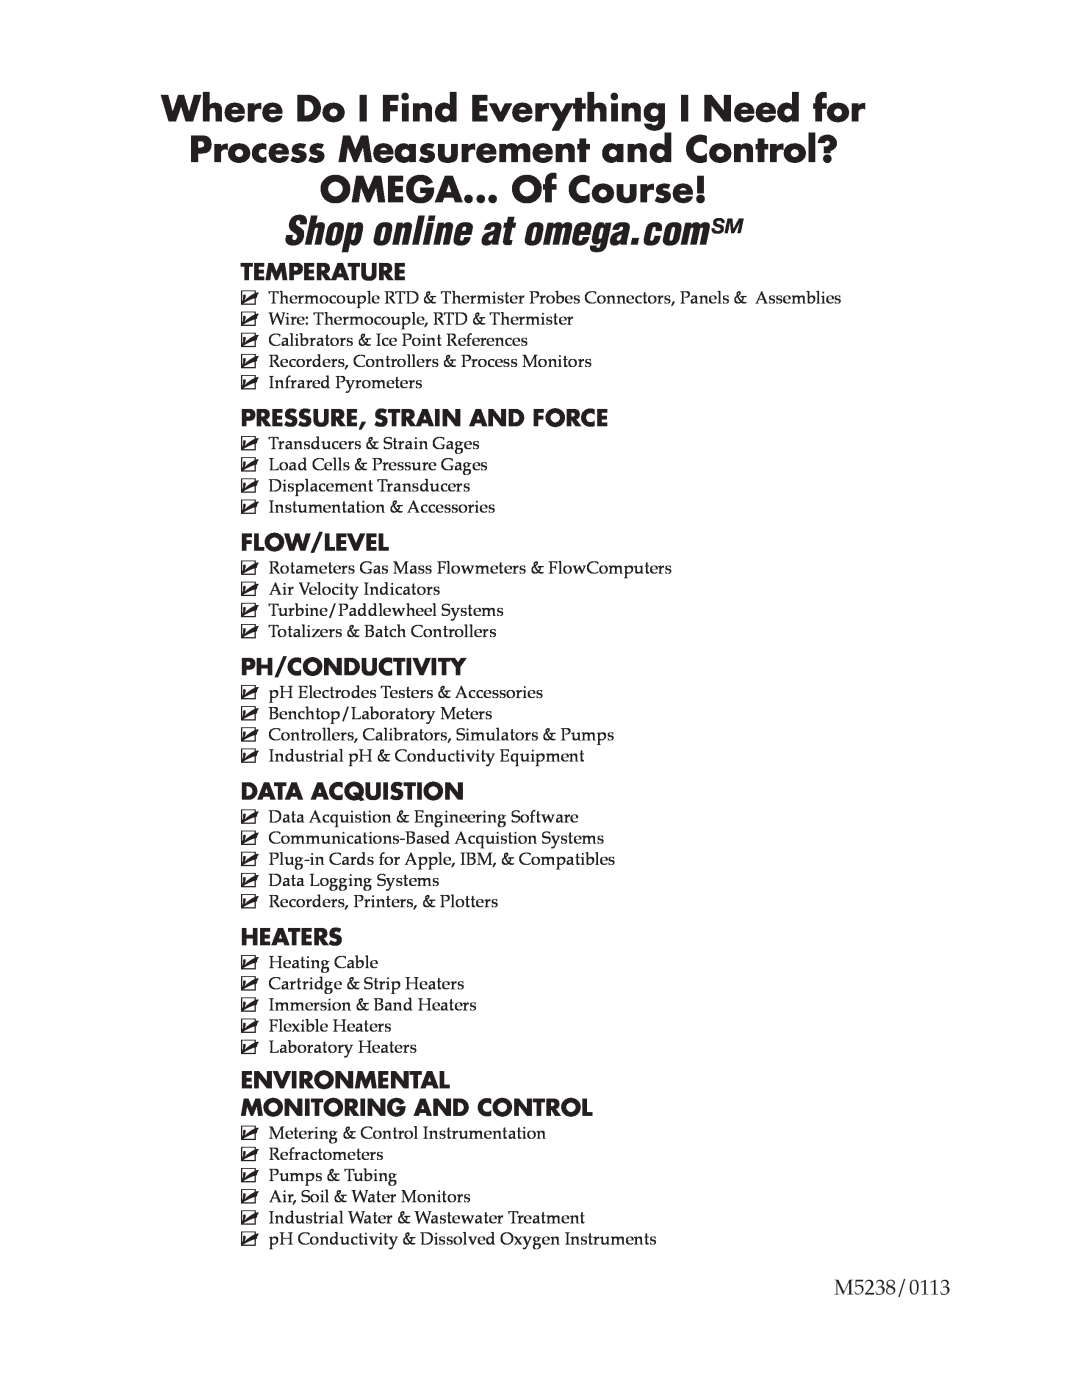 Omega OM-EL-ENVIROPAD-TC Temperature, Pressure, Strain And Force, Flow/Level, Ph/Conductivity, Data Acquistion, Heaters 